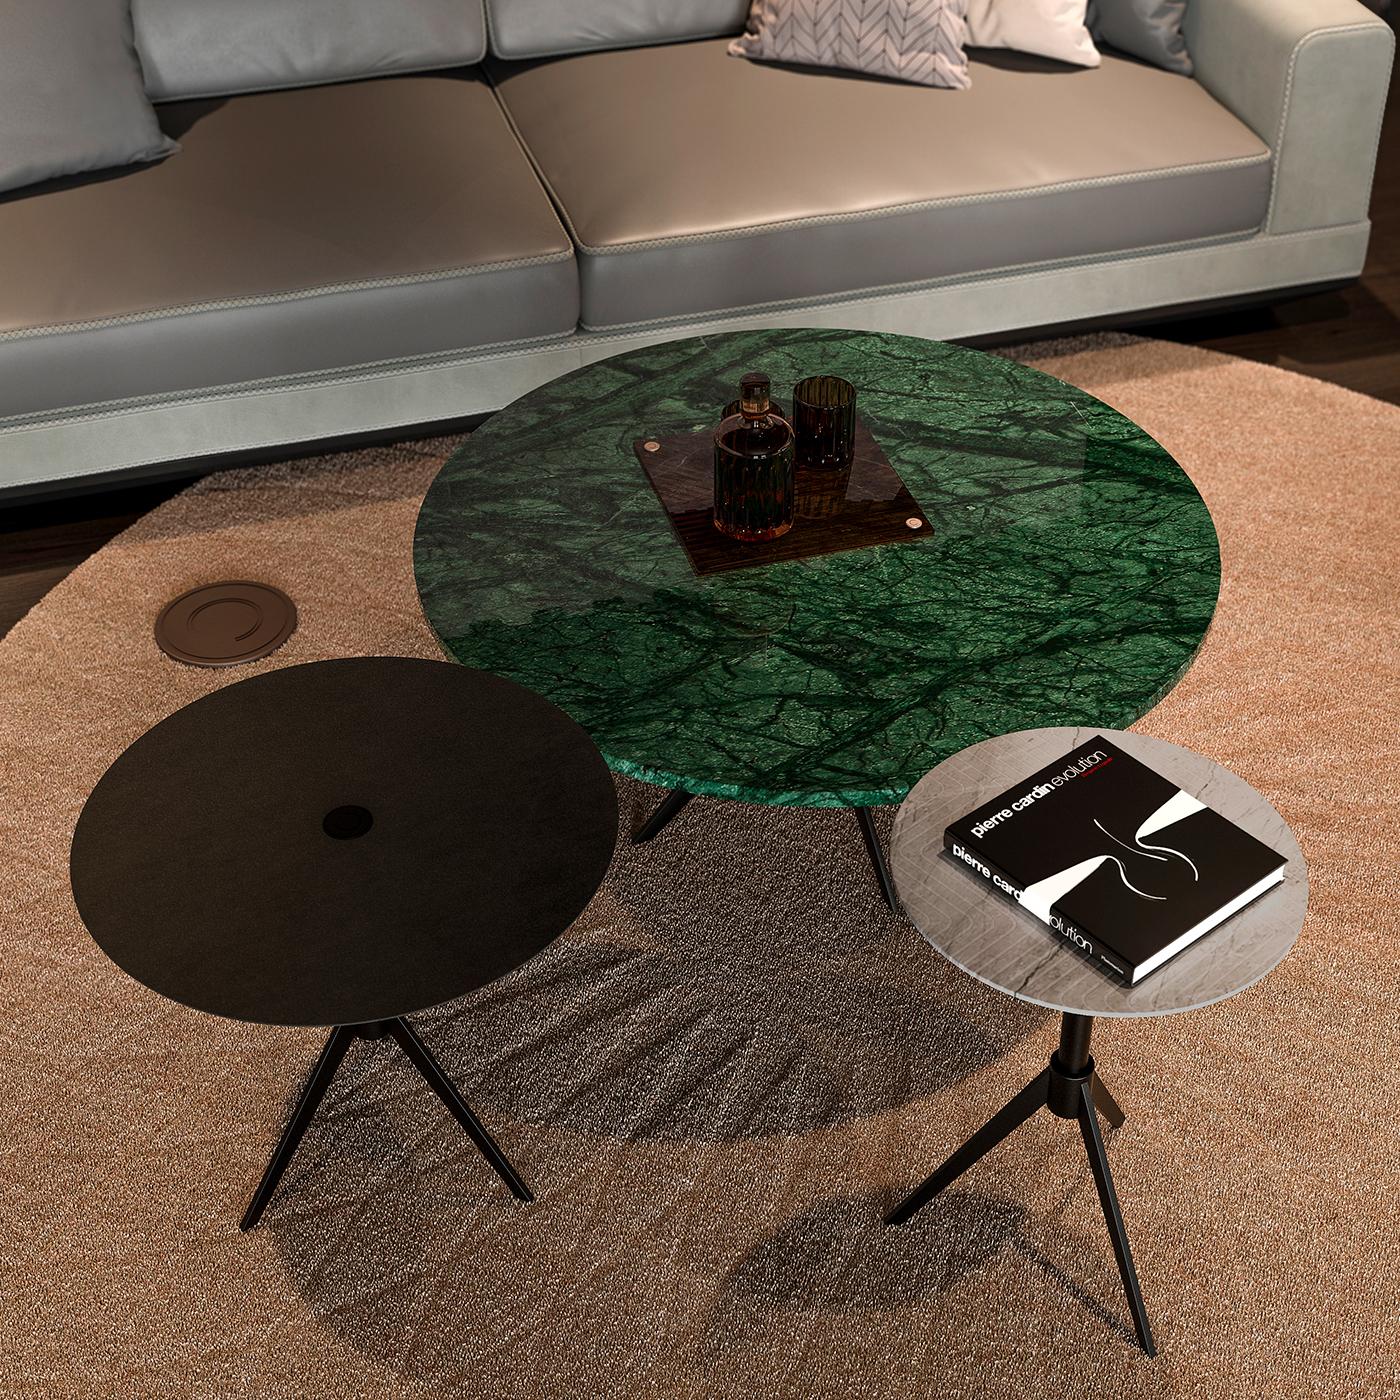 Stylish and bold in character, this coffee table features a color and design that is reminiscent of a lush, dark forest. The metal base is black, while the marble top is an elegant dark green with black veins, perfect for any contemporary style